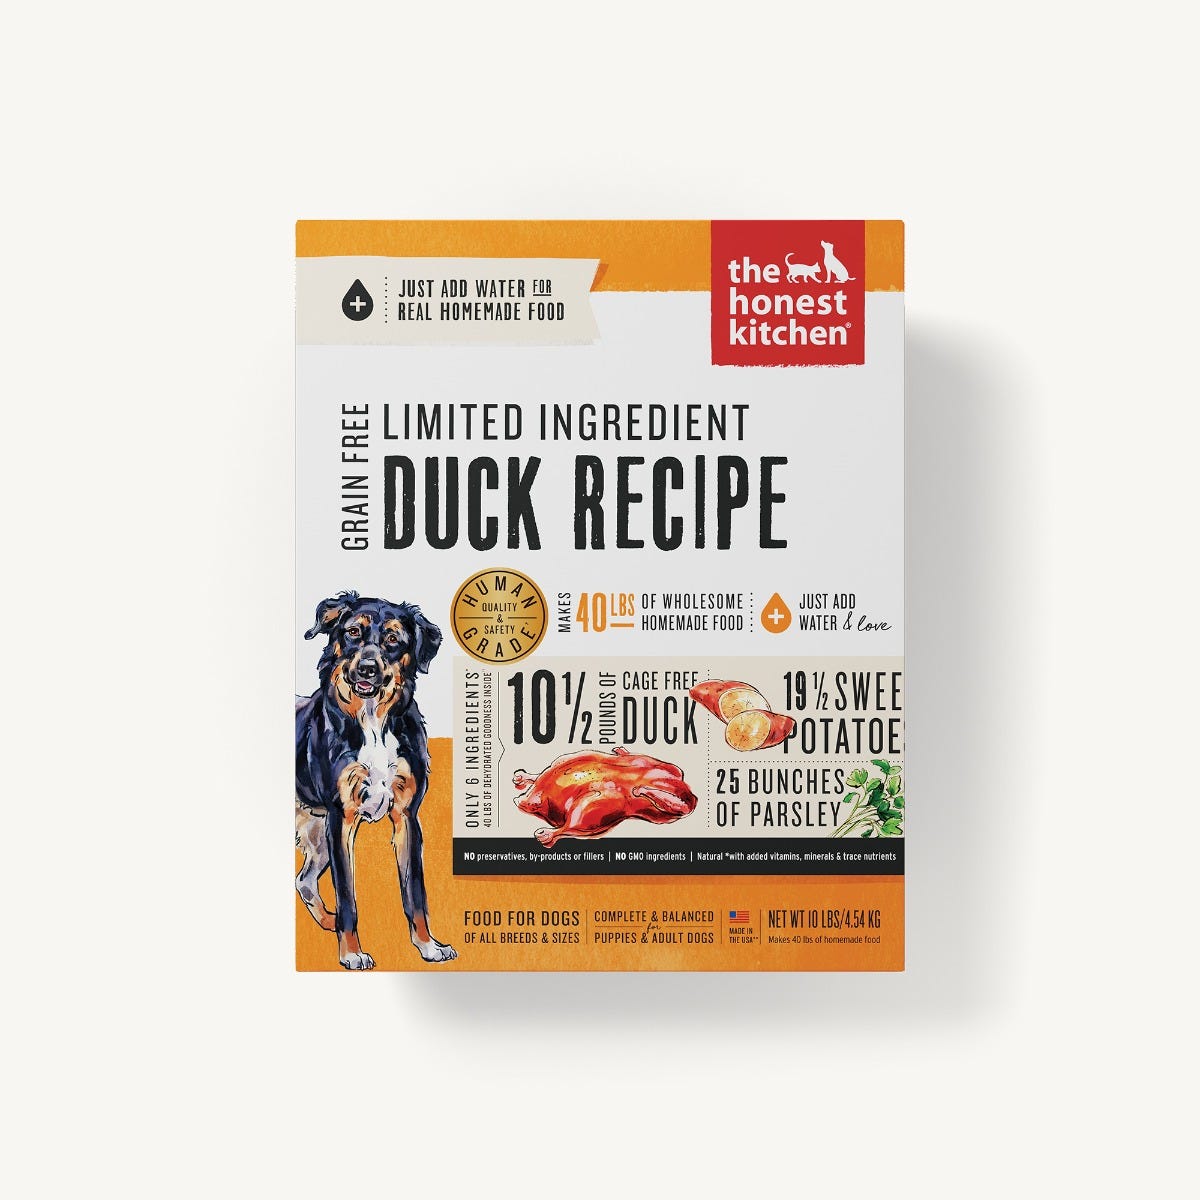 The Honest Kitchen - Dehydrated - Limited Ingredient Duck Recipe (Dog Food)